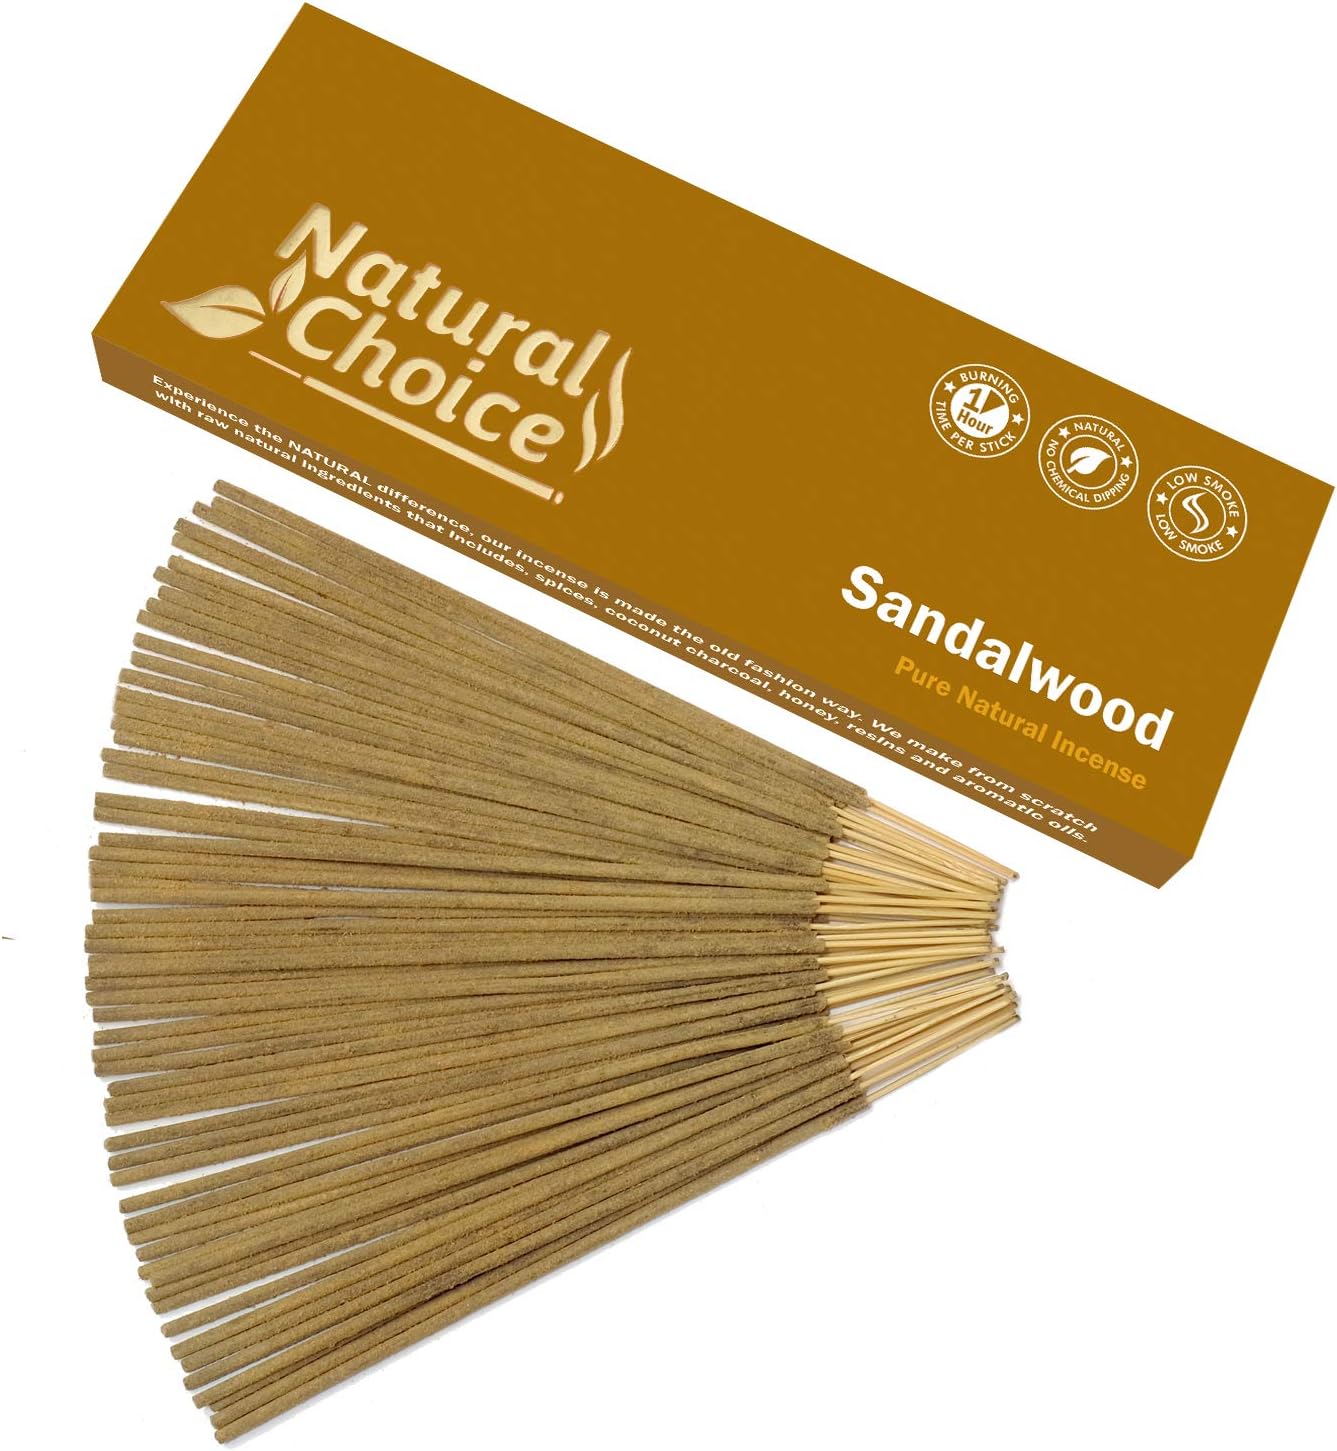 Natural Choice Incense Sandalwood Incense Sticks 100 Grams, Low Smoke Traditional Incense Sticks Made from Scratch, Never Dipped (Sandalwood, Single Pack)